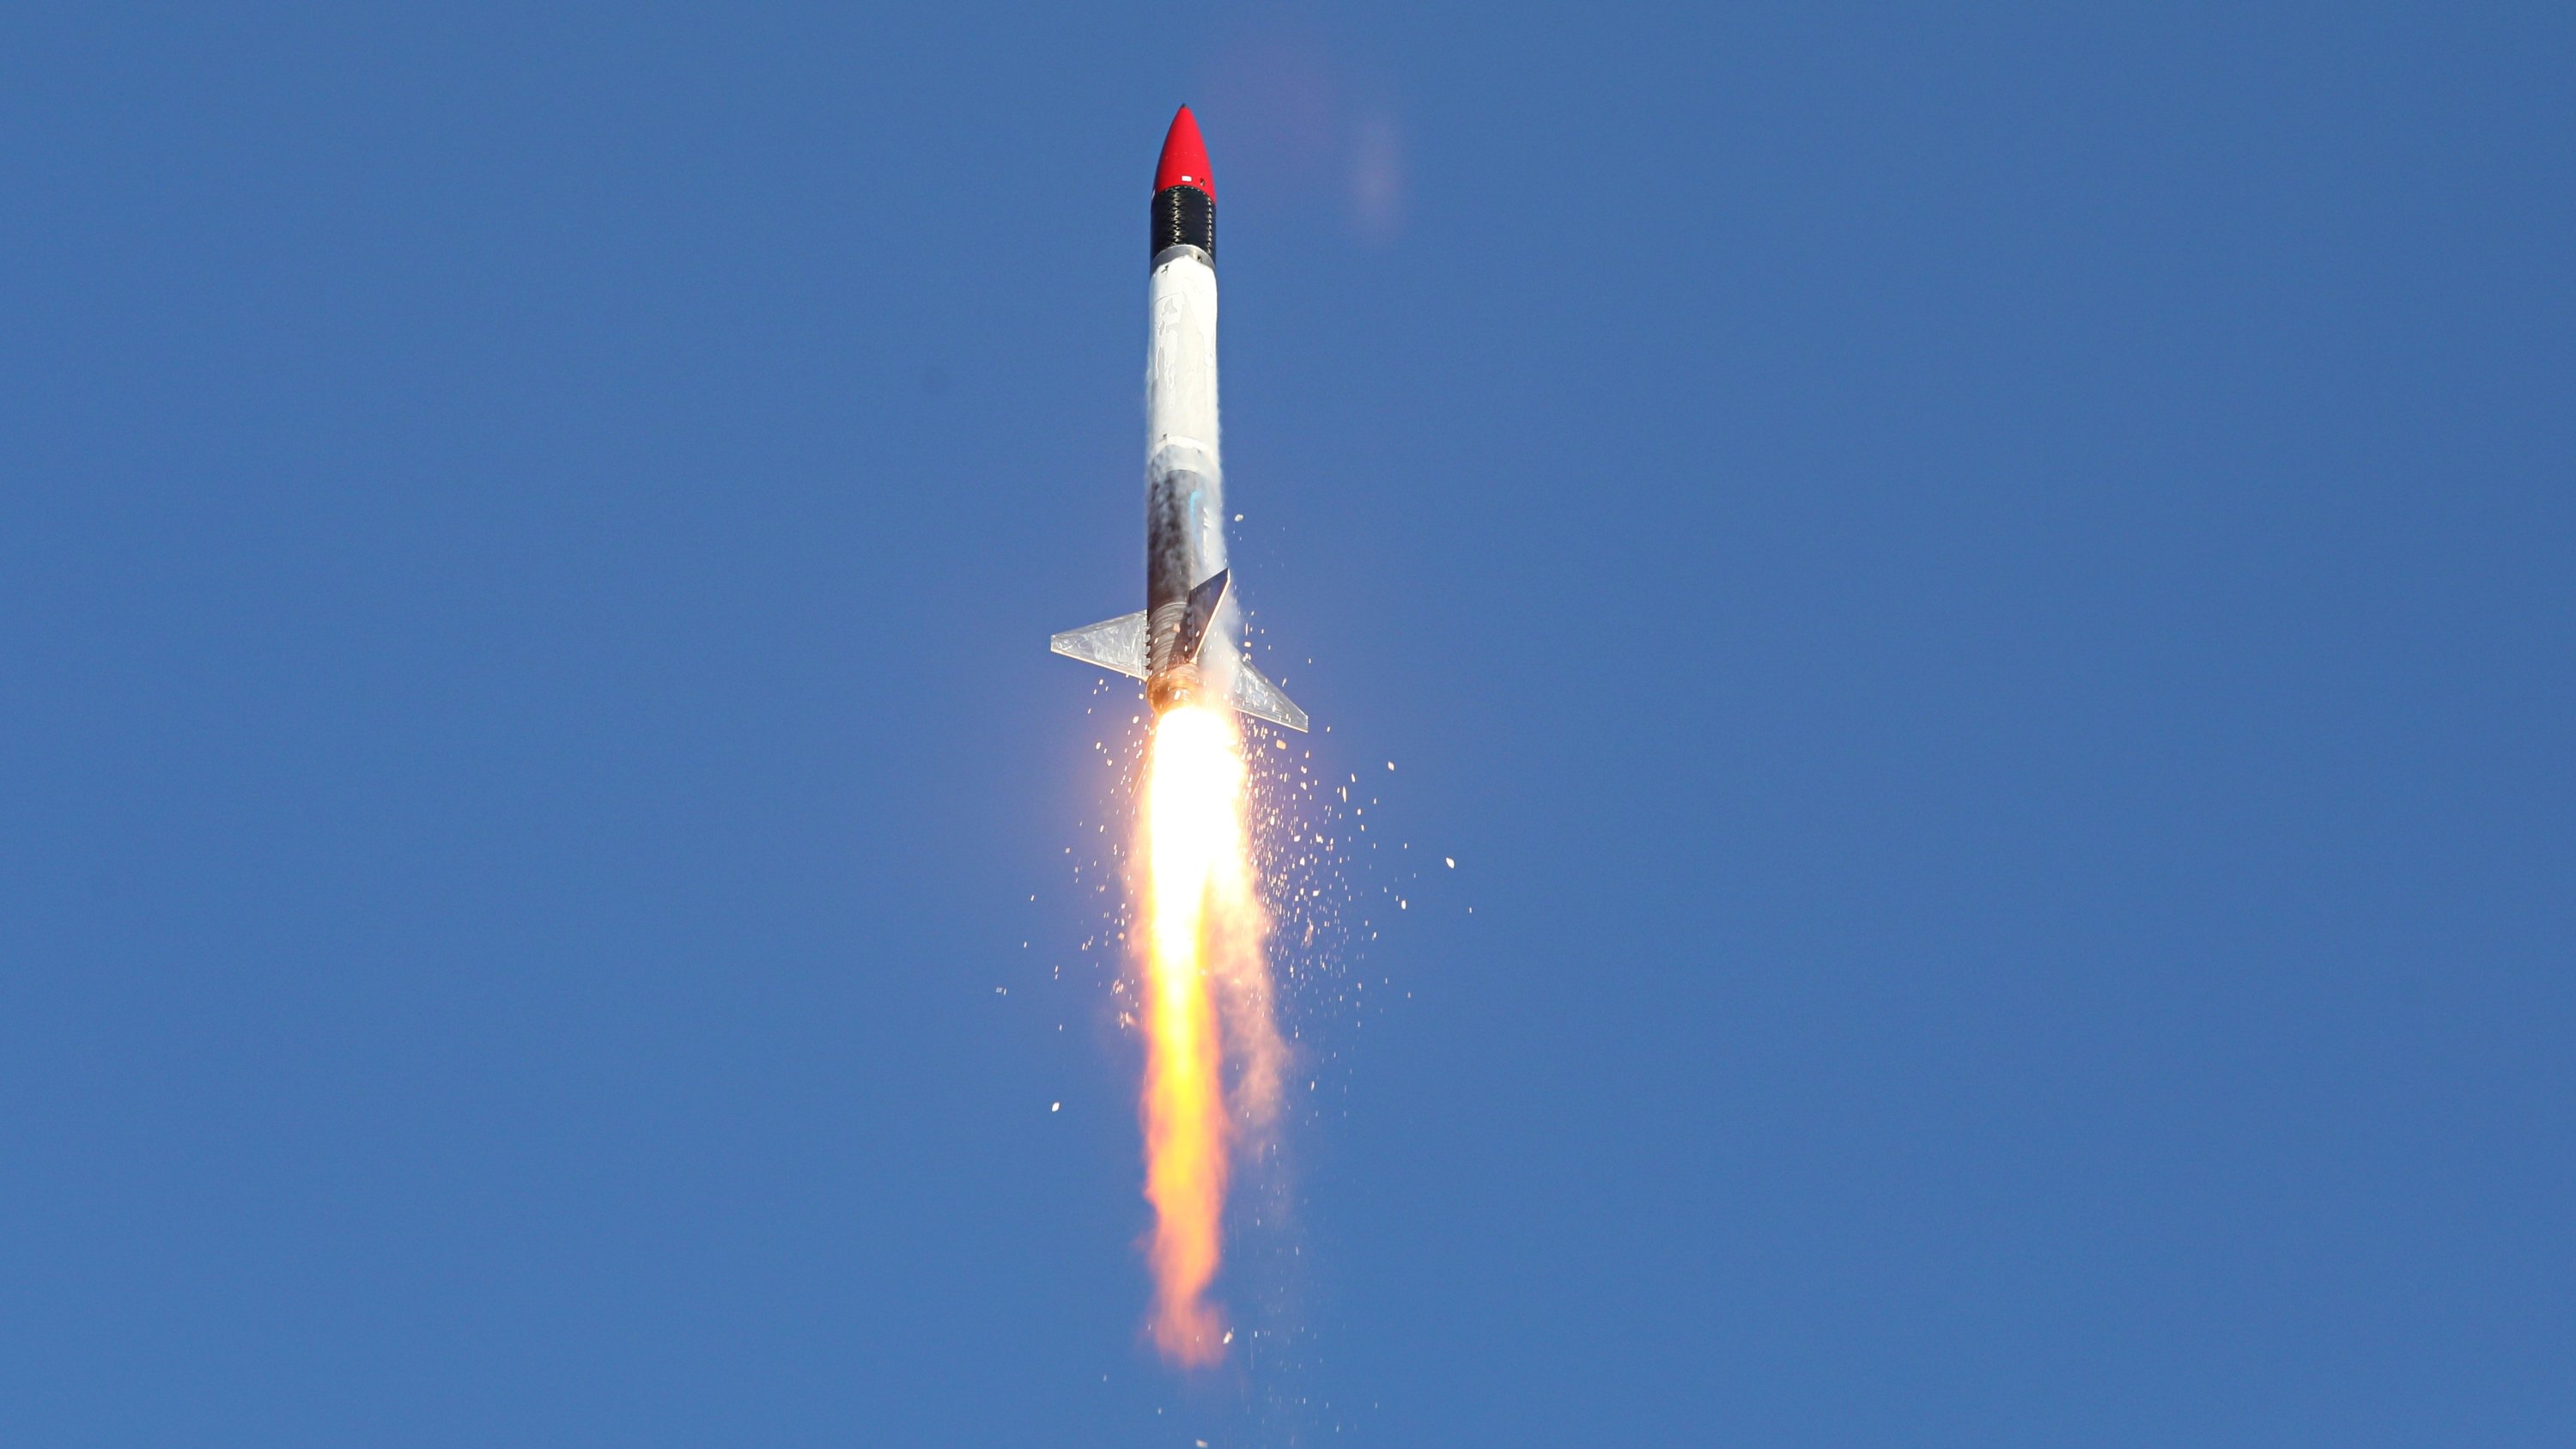 Turkey's probe rocket developed with hybrid engine technology is seen in the air after it was launched for flight tests from the northern Sinop province, Turkey, July 19, 2021. (AA Photo)